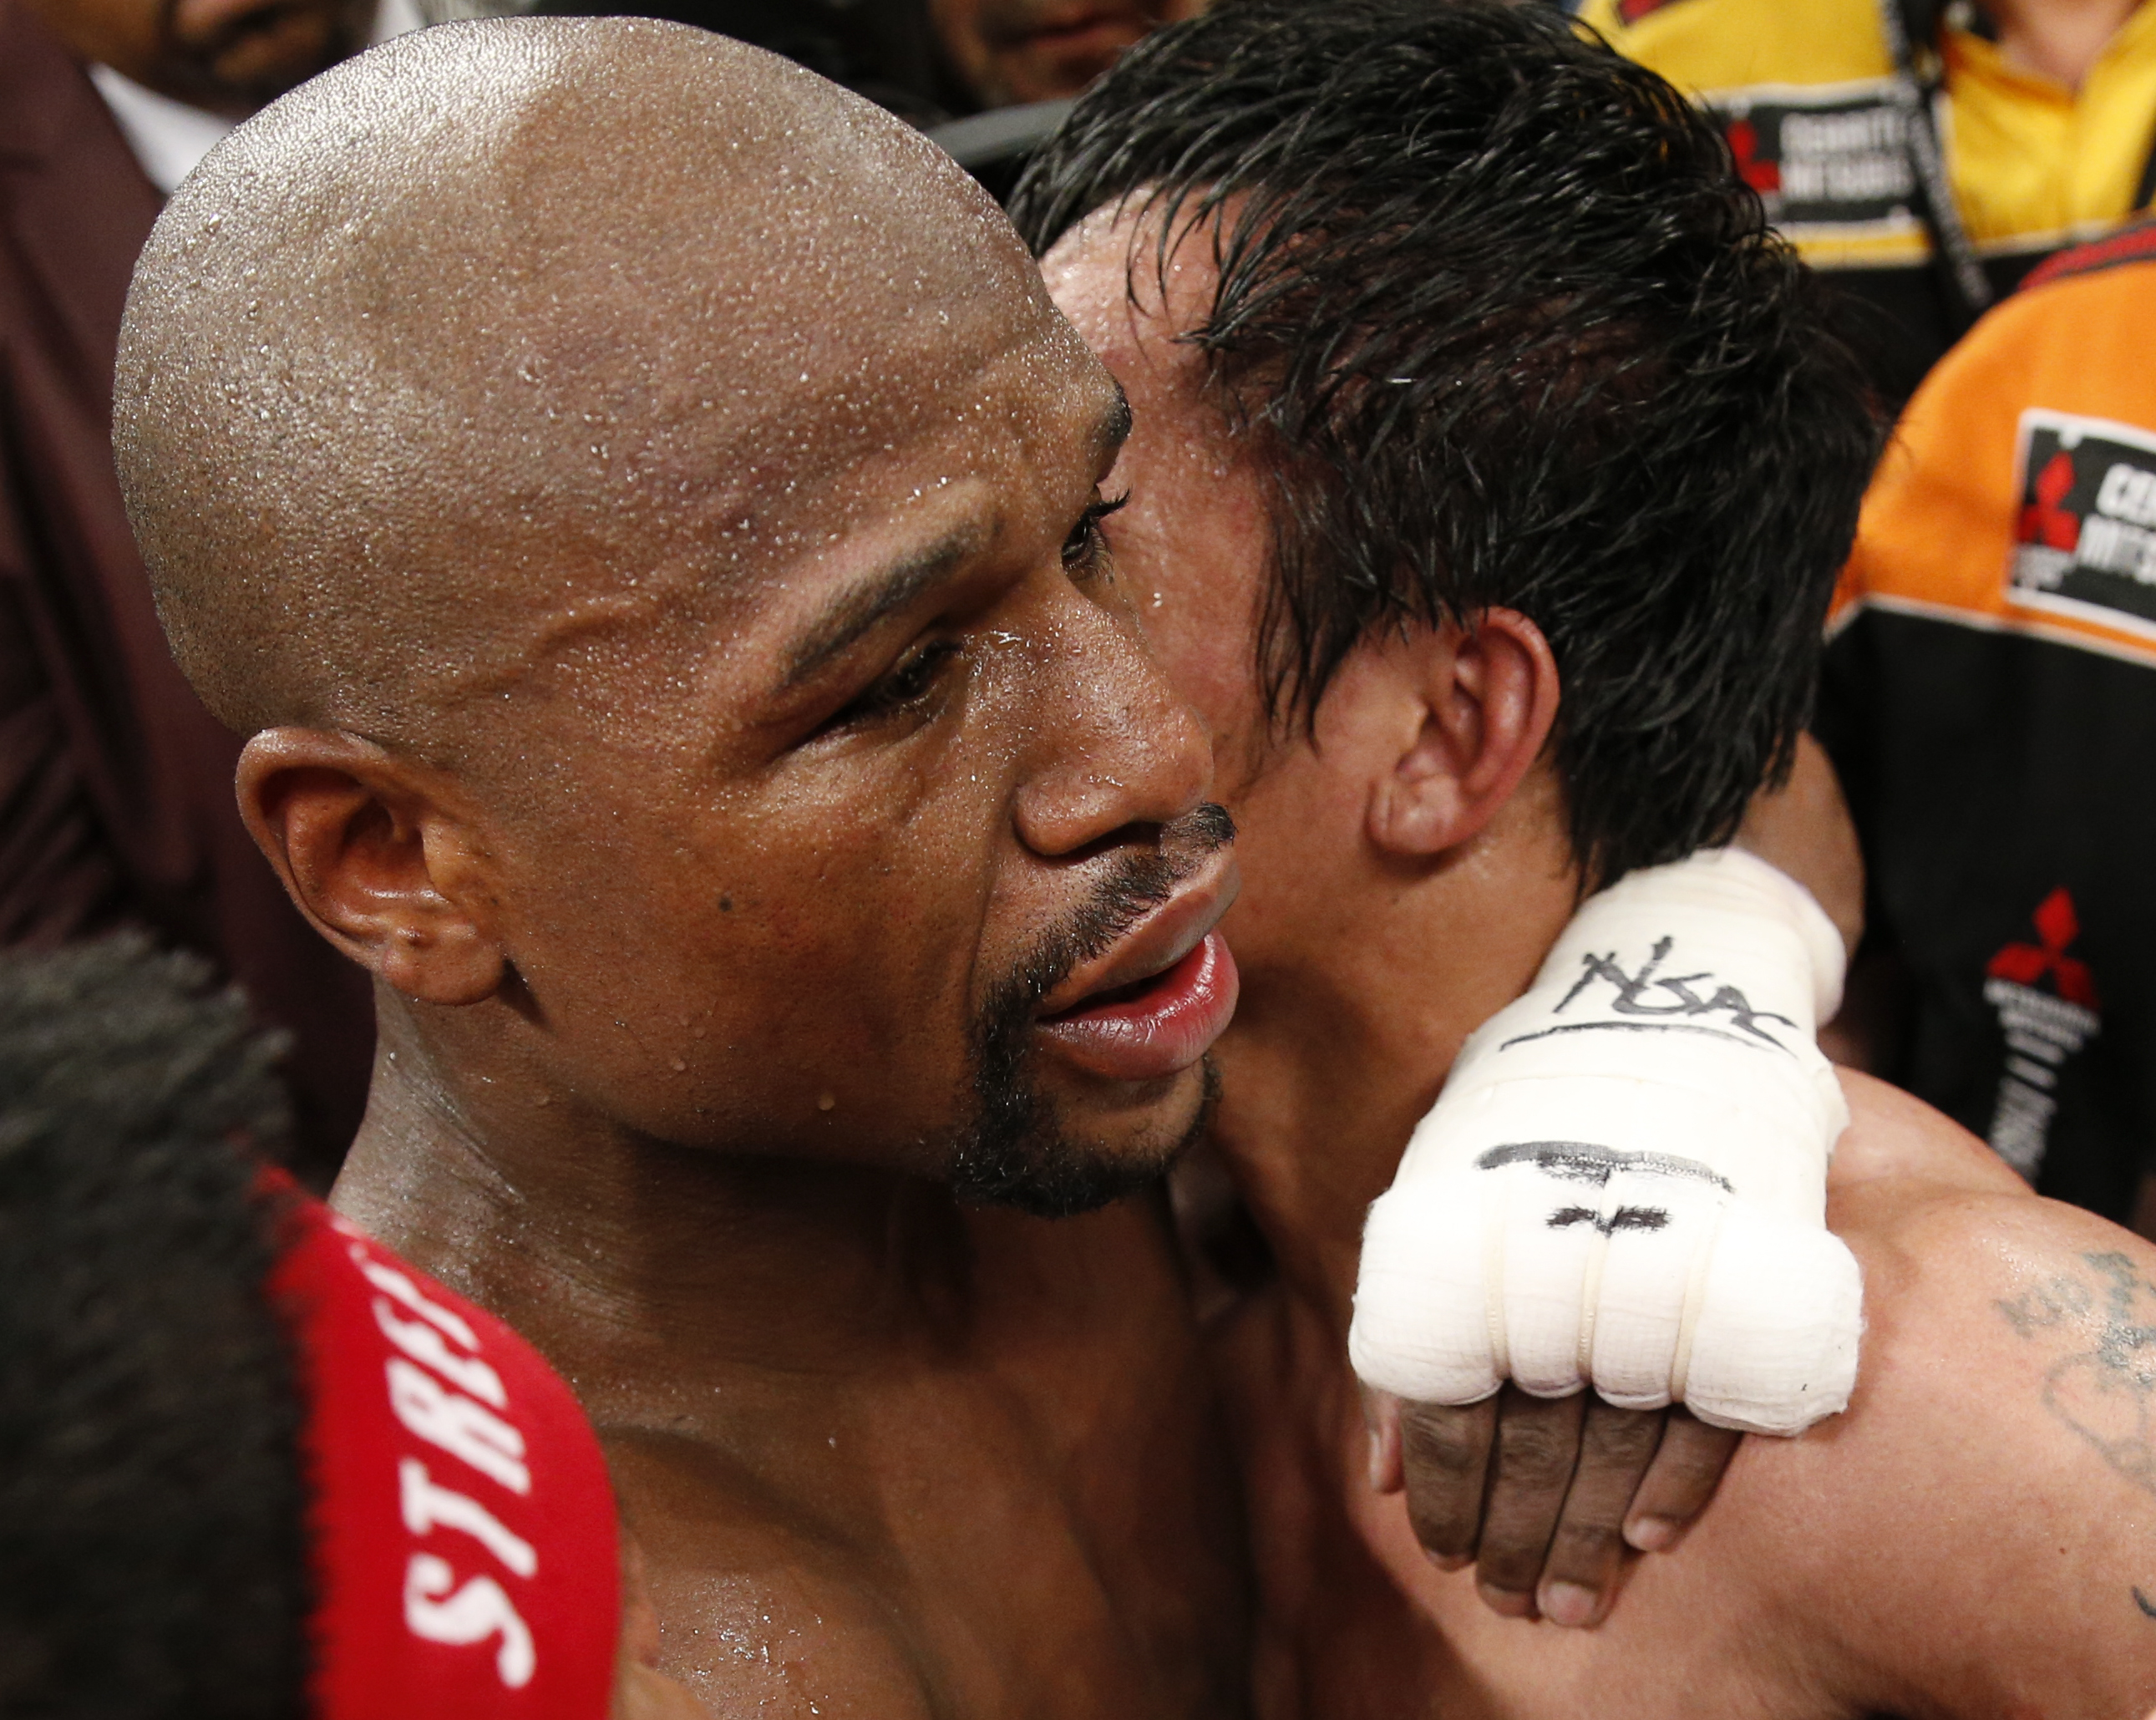 PHOTO:Floyd Mayweather Jr., left, and Manny Pacquiao, from the Philippines, embrace in the ring at the finish of their welterweight title fight on Saturday, May 2, 2015 in Las Vegas.  